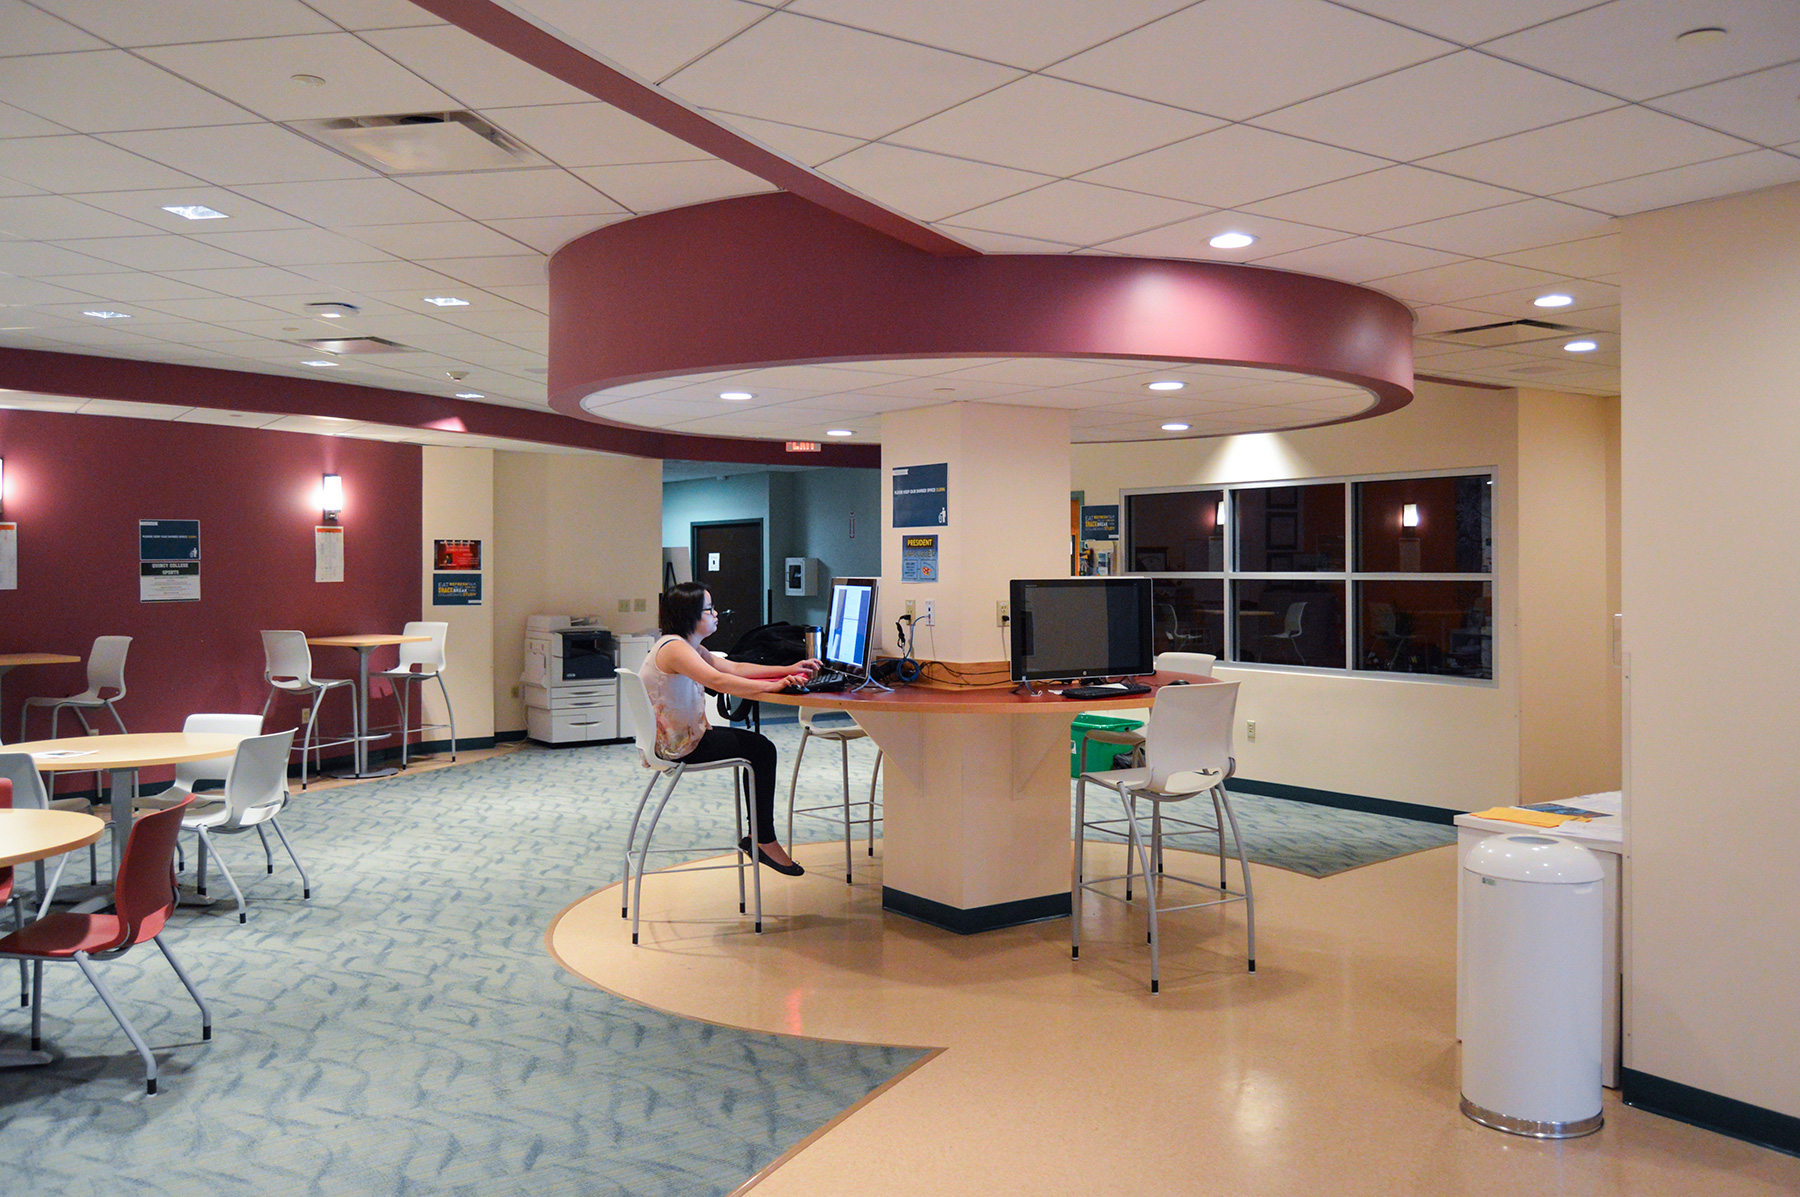 Quincy College student center seating area with high tables